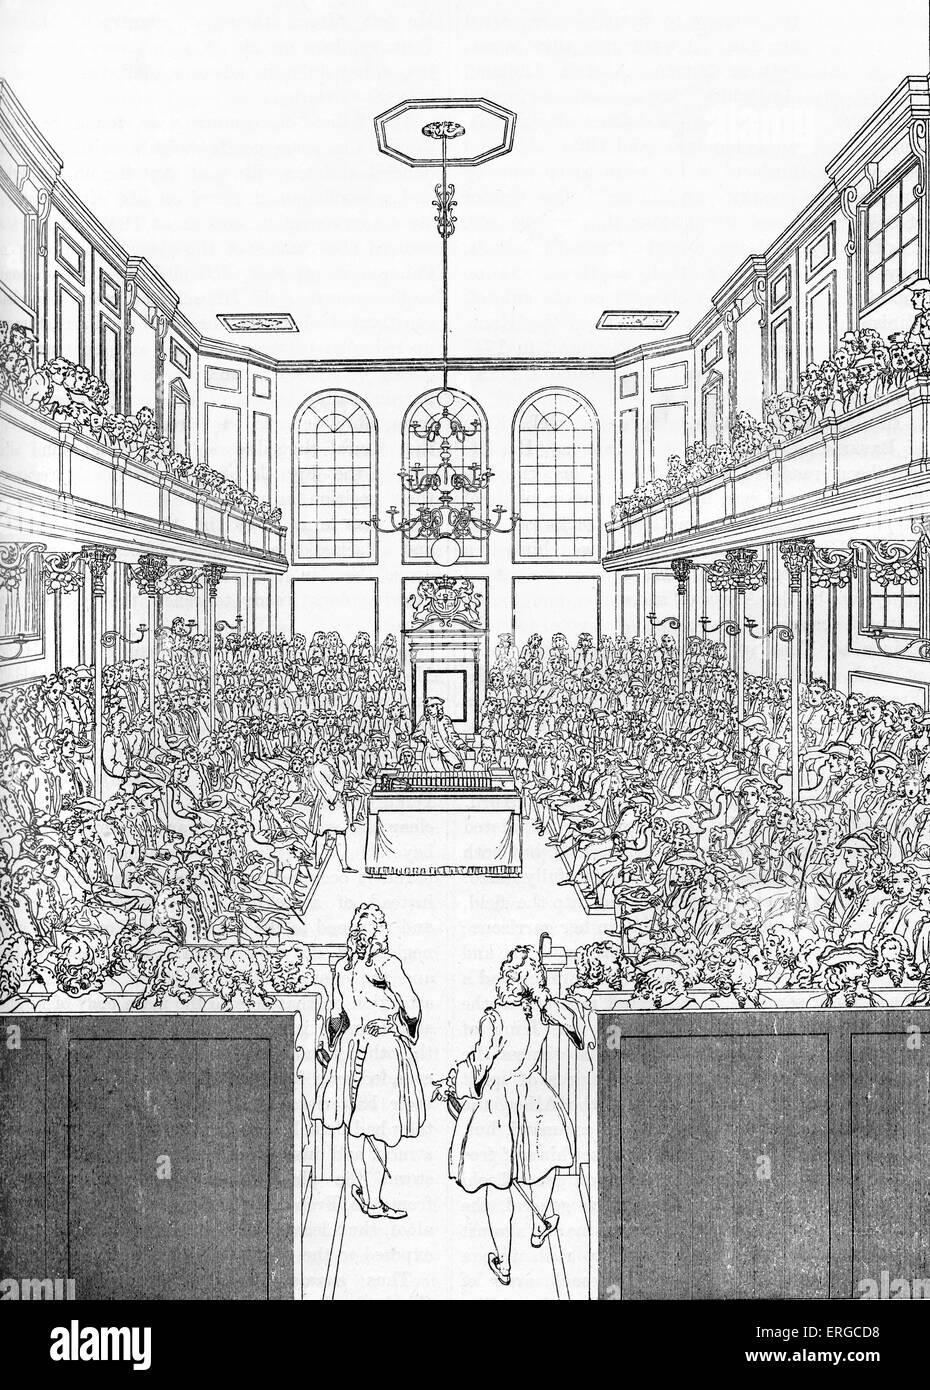 House of Commons in London, 1742 - interior. From a drawing by Gravelot engraved by W. J.White. House in session. Stock Photo